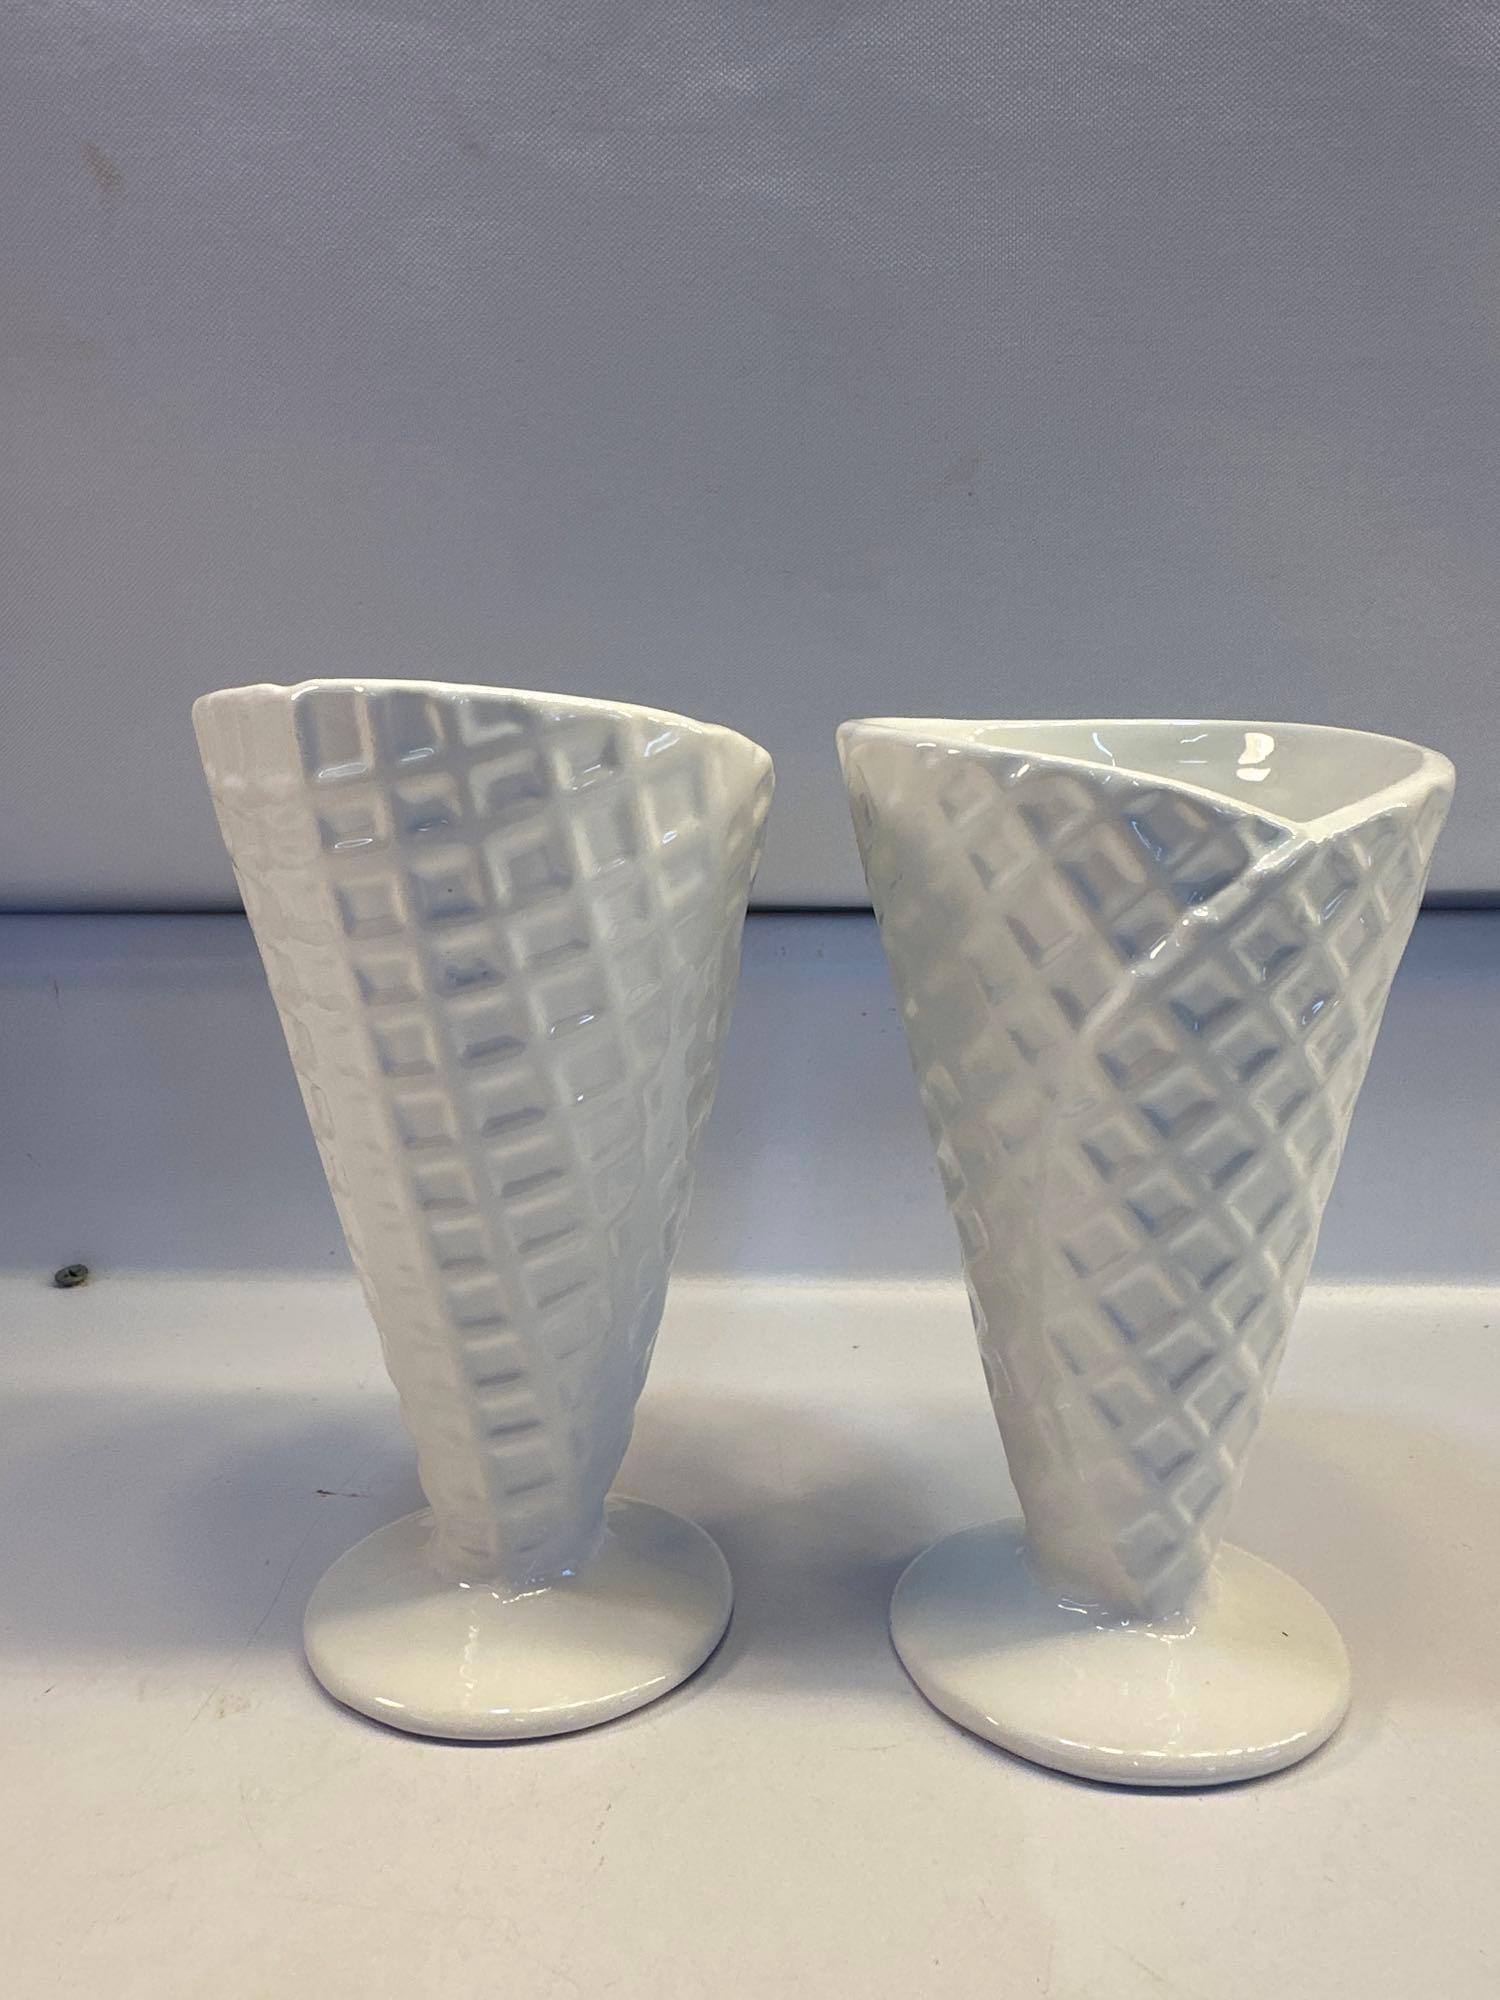 Set of 2 Waffle Cone/ Ice Cream Cup